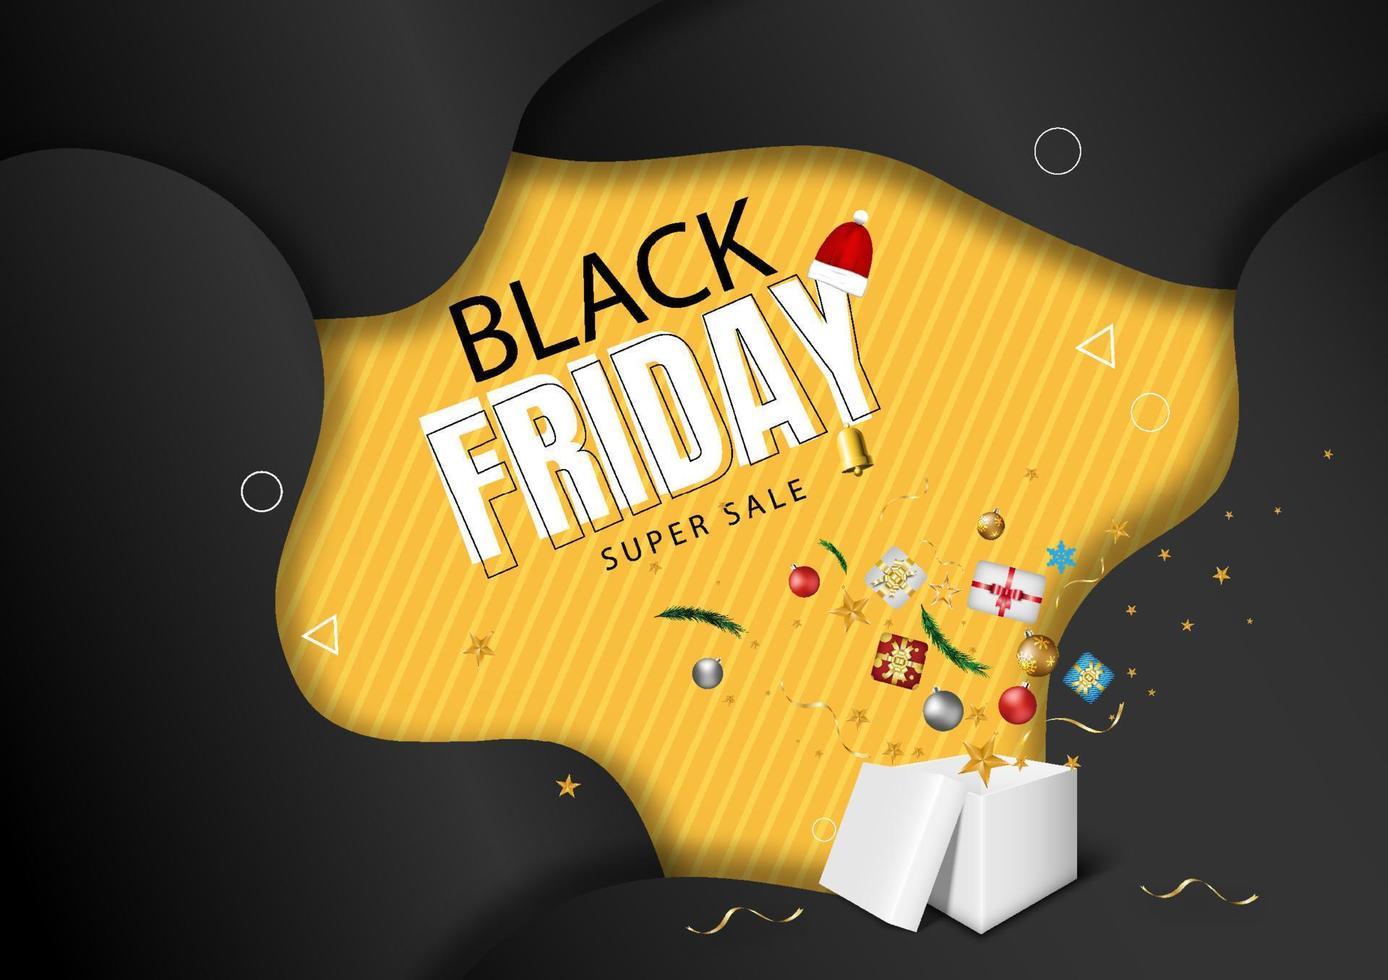 Black friday sale gift box on black background made of vector. vector